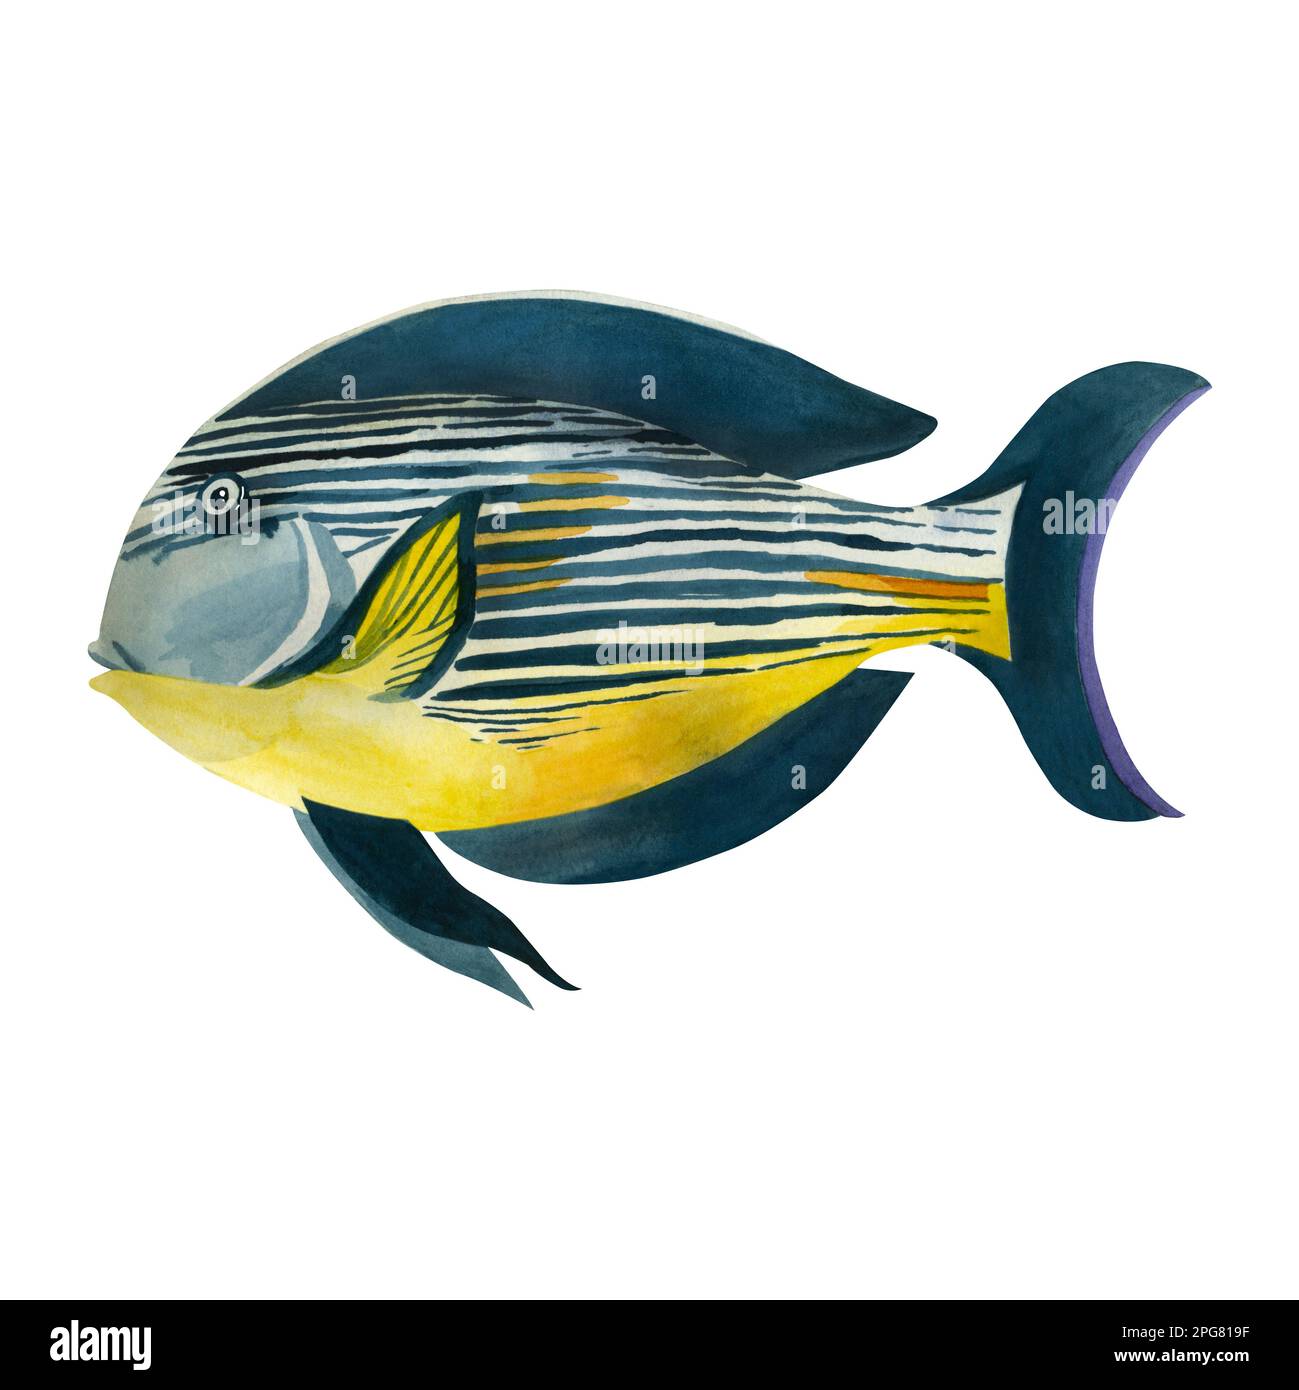 Fish of the Red Sea. Dark blue striped fish with yellow spots, hand-drawn in watercolor on a white background. Suitable for printing on fabric, paper, Stock Photo